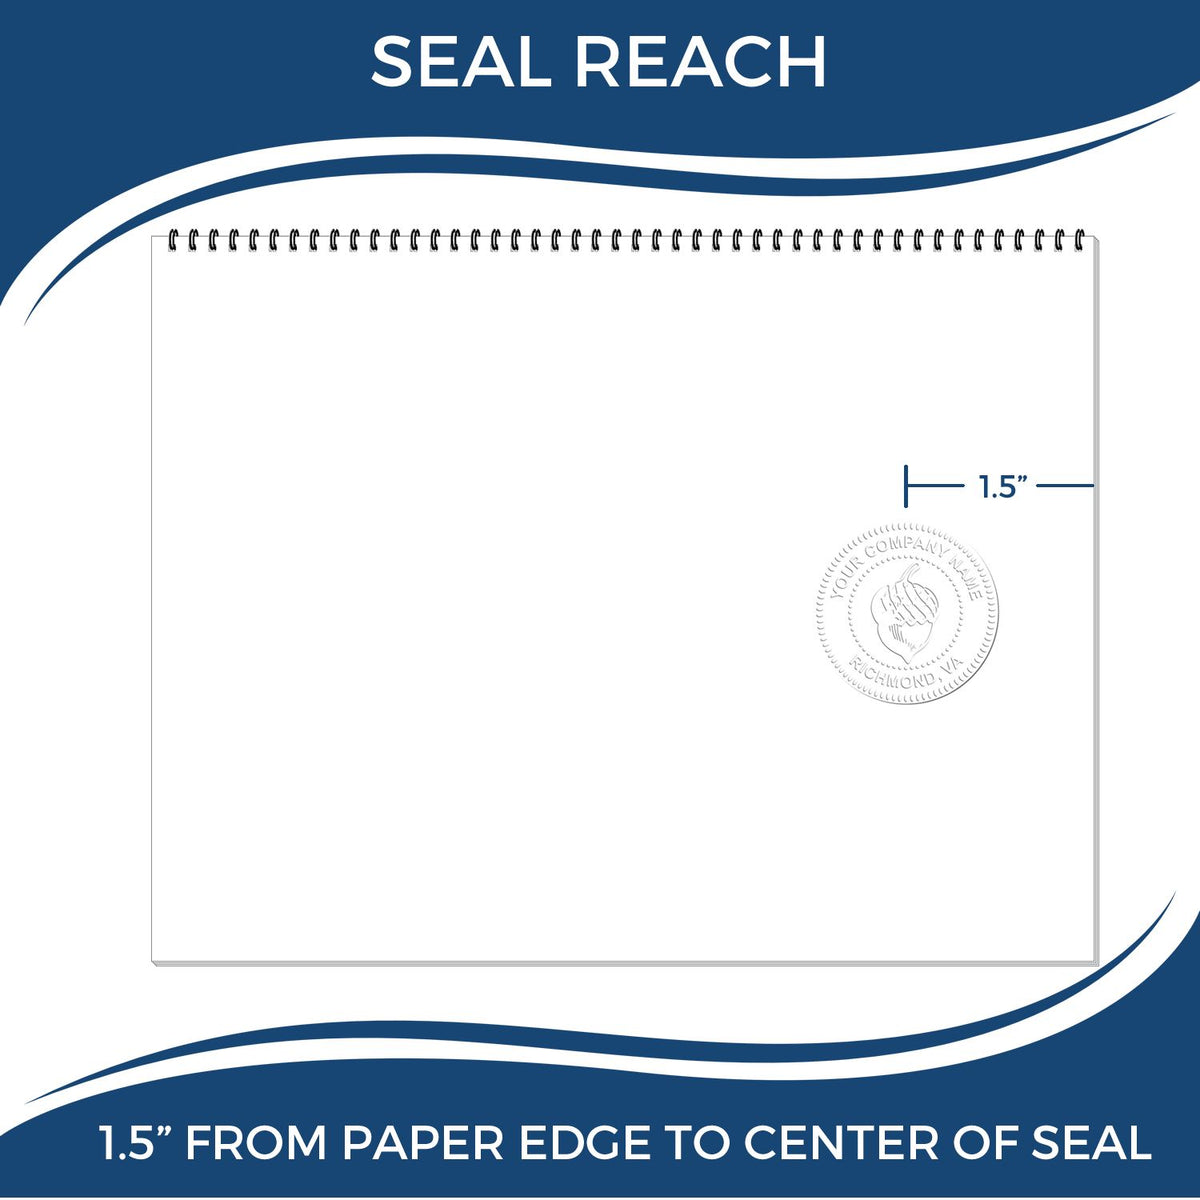 An infographic showing the seal reach which is represented by a ruler and a miniature seal image of the Hybrid Nevada Architect Seal